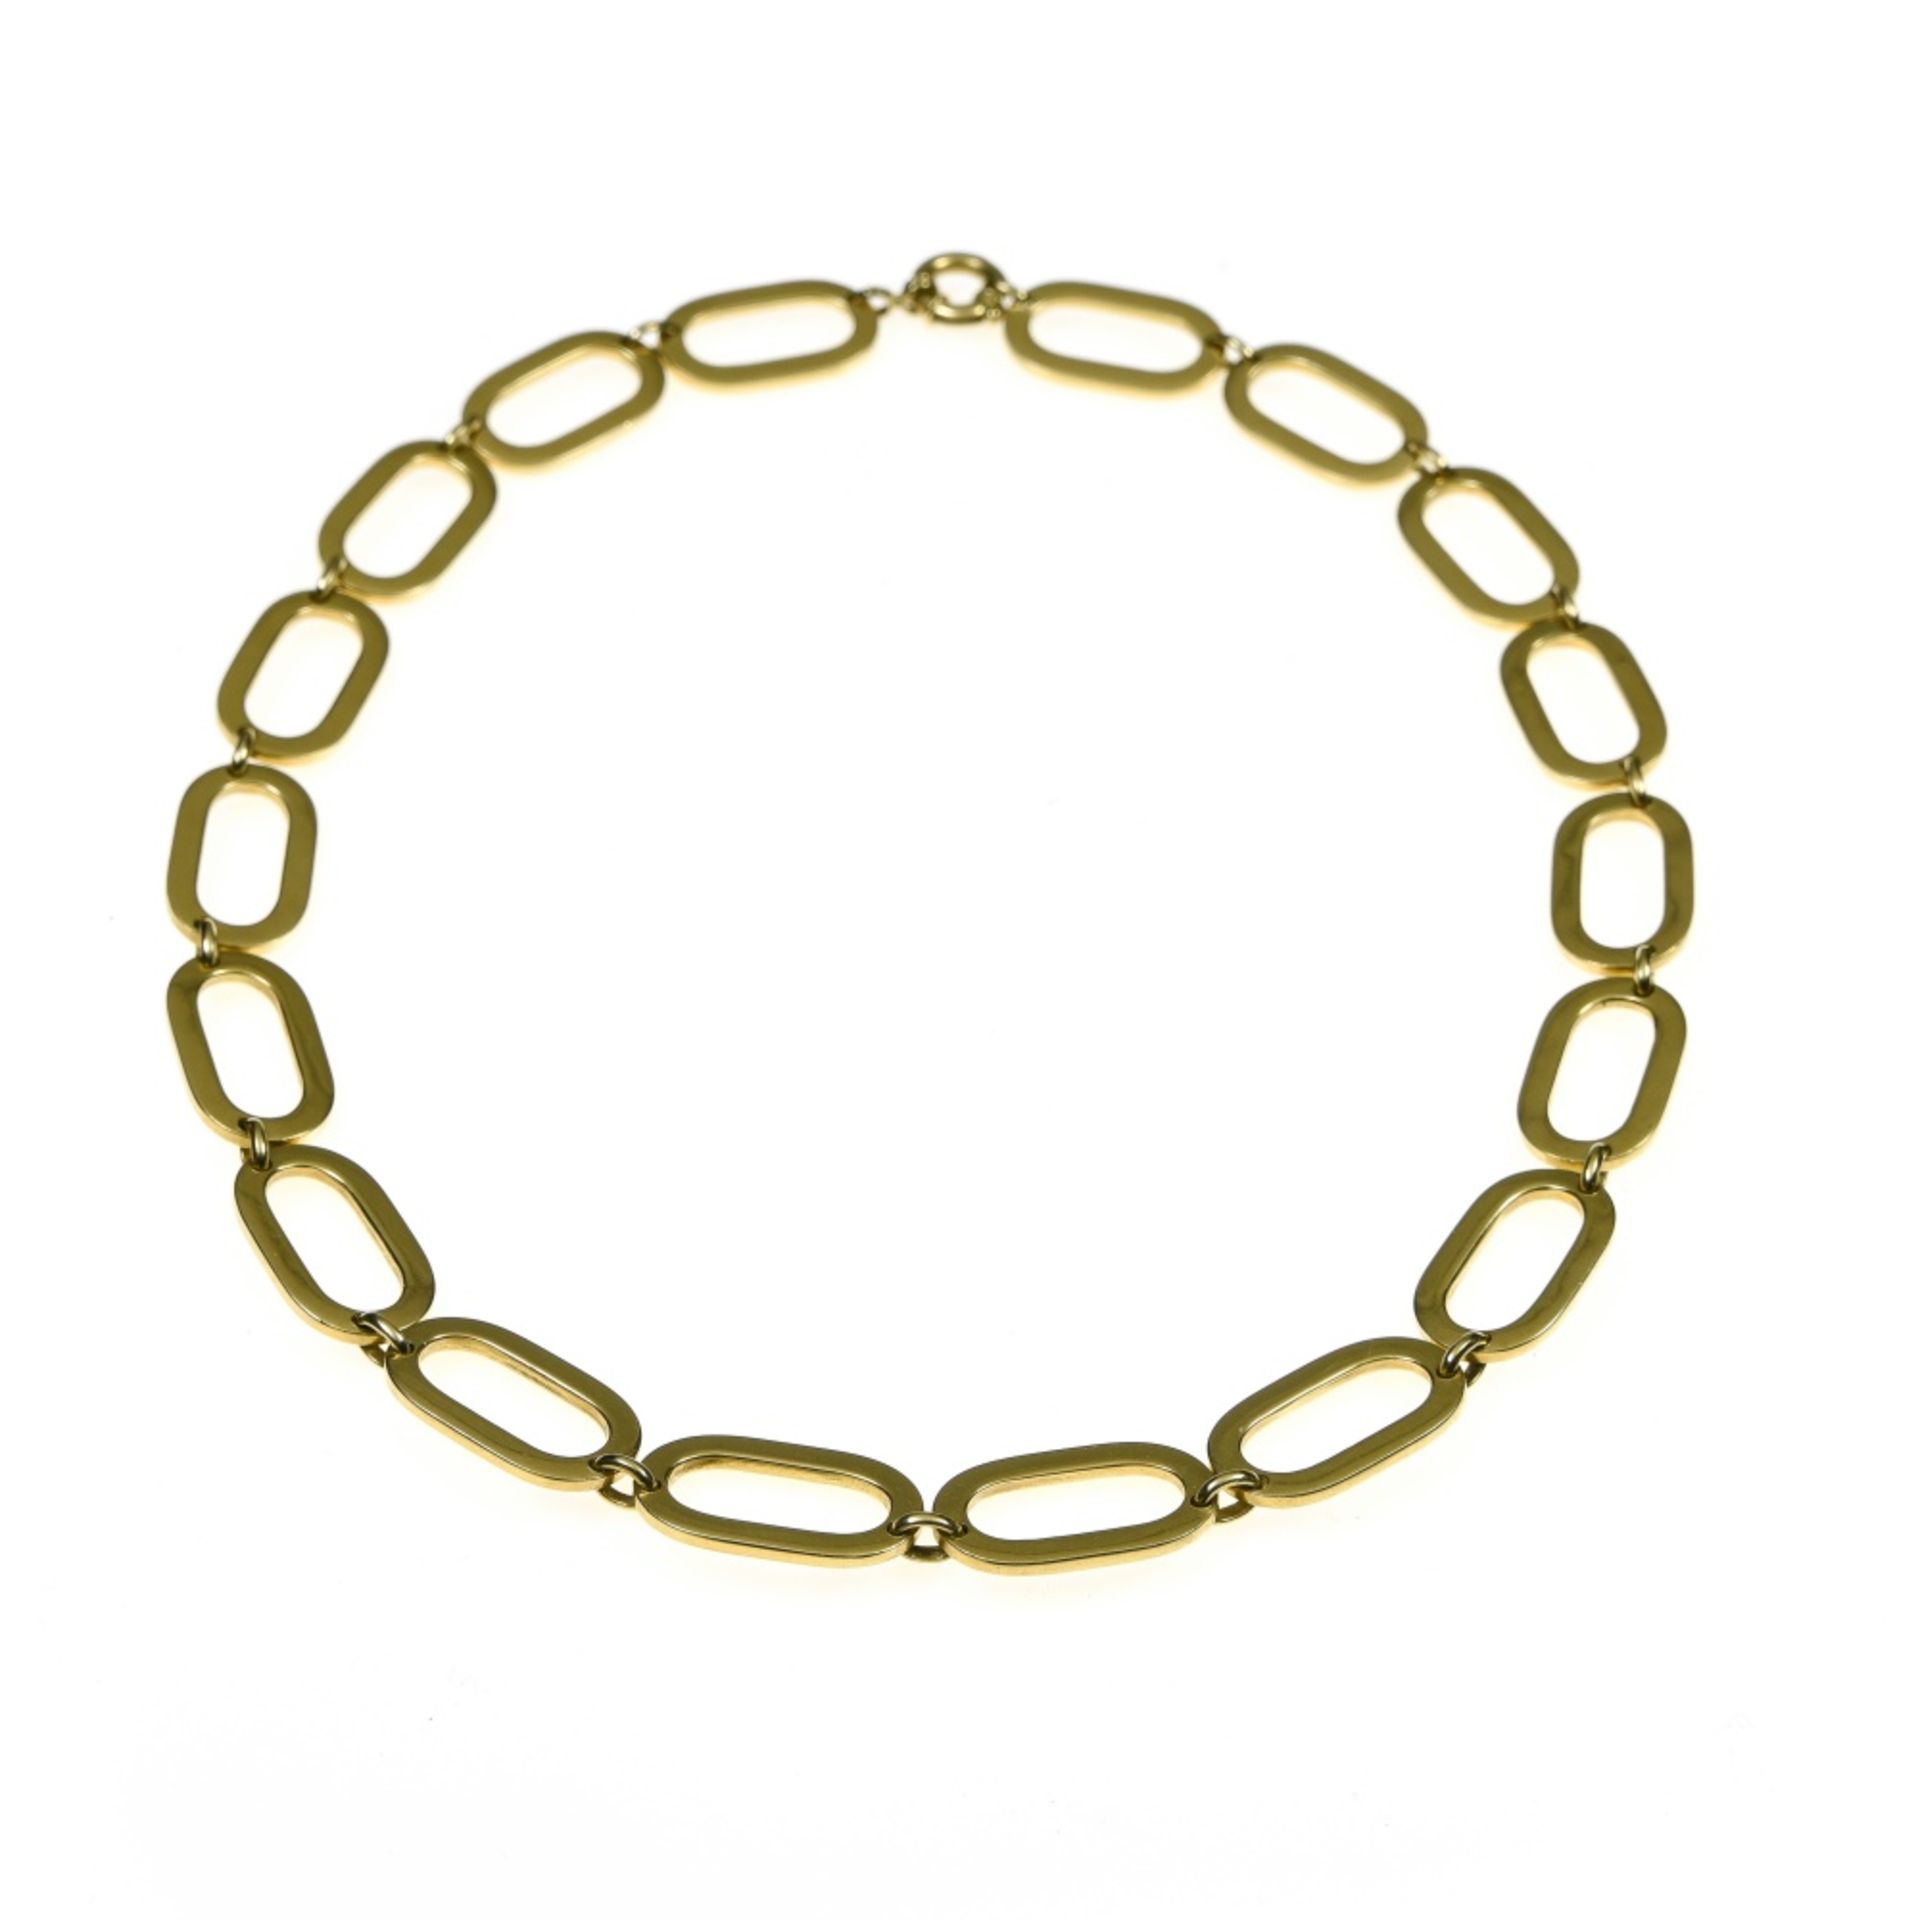 Gold necklace 18 kt yellow gold choker composed of 18 oval chain links. Contemporary work.